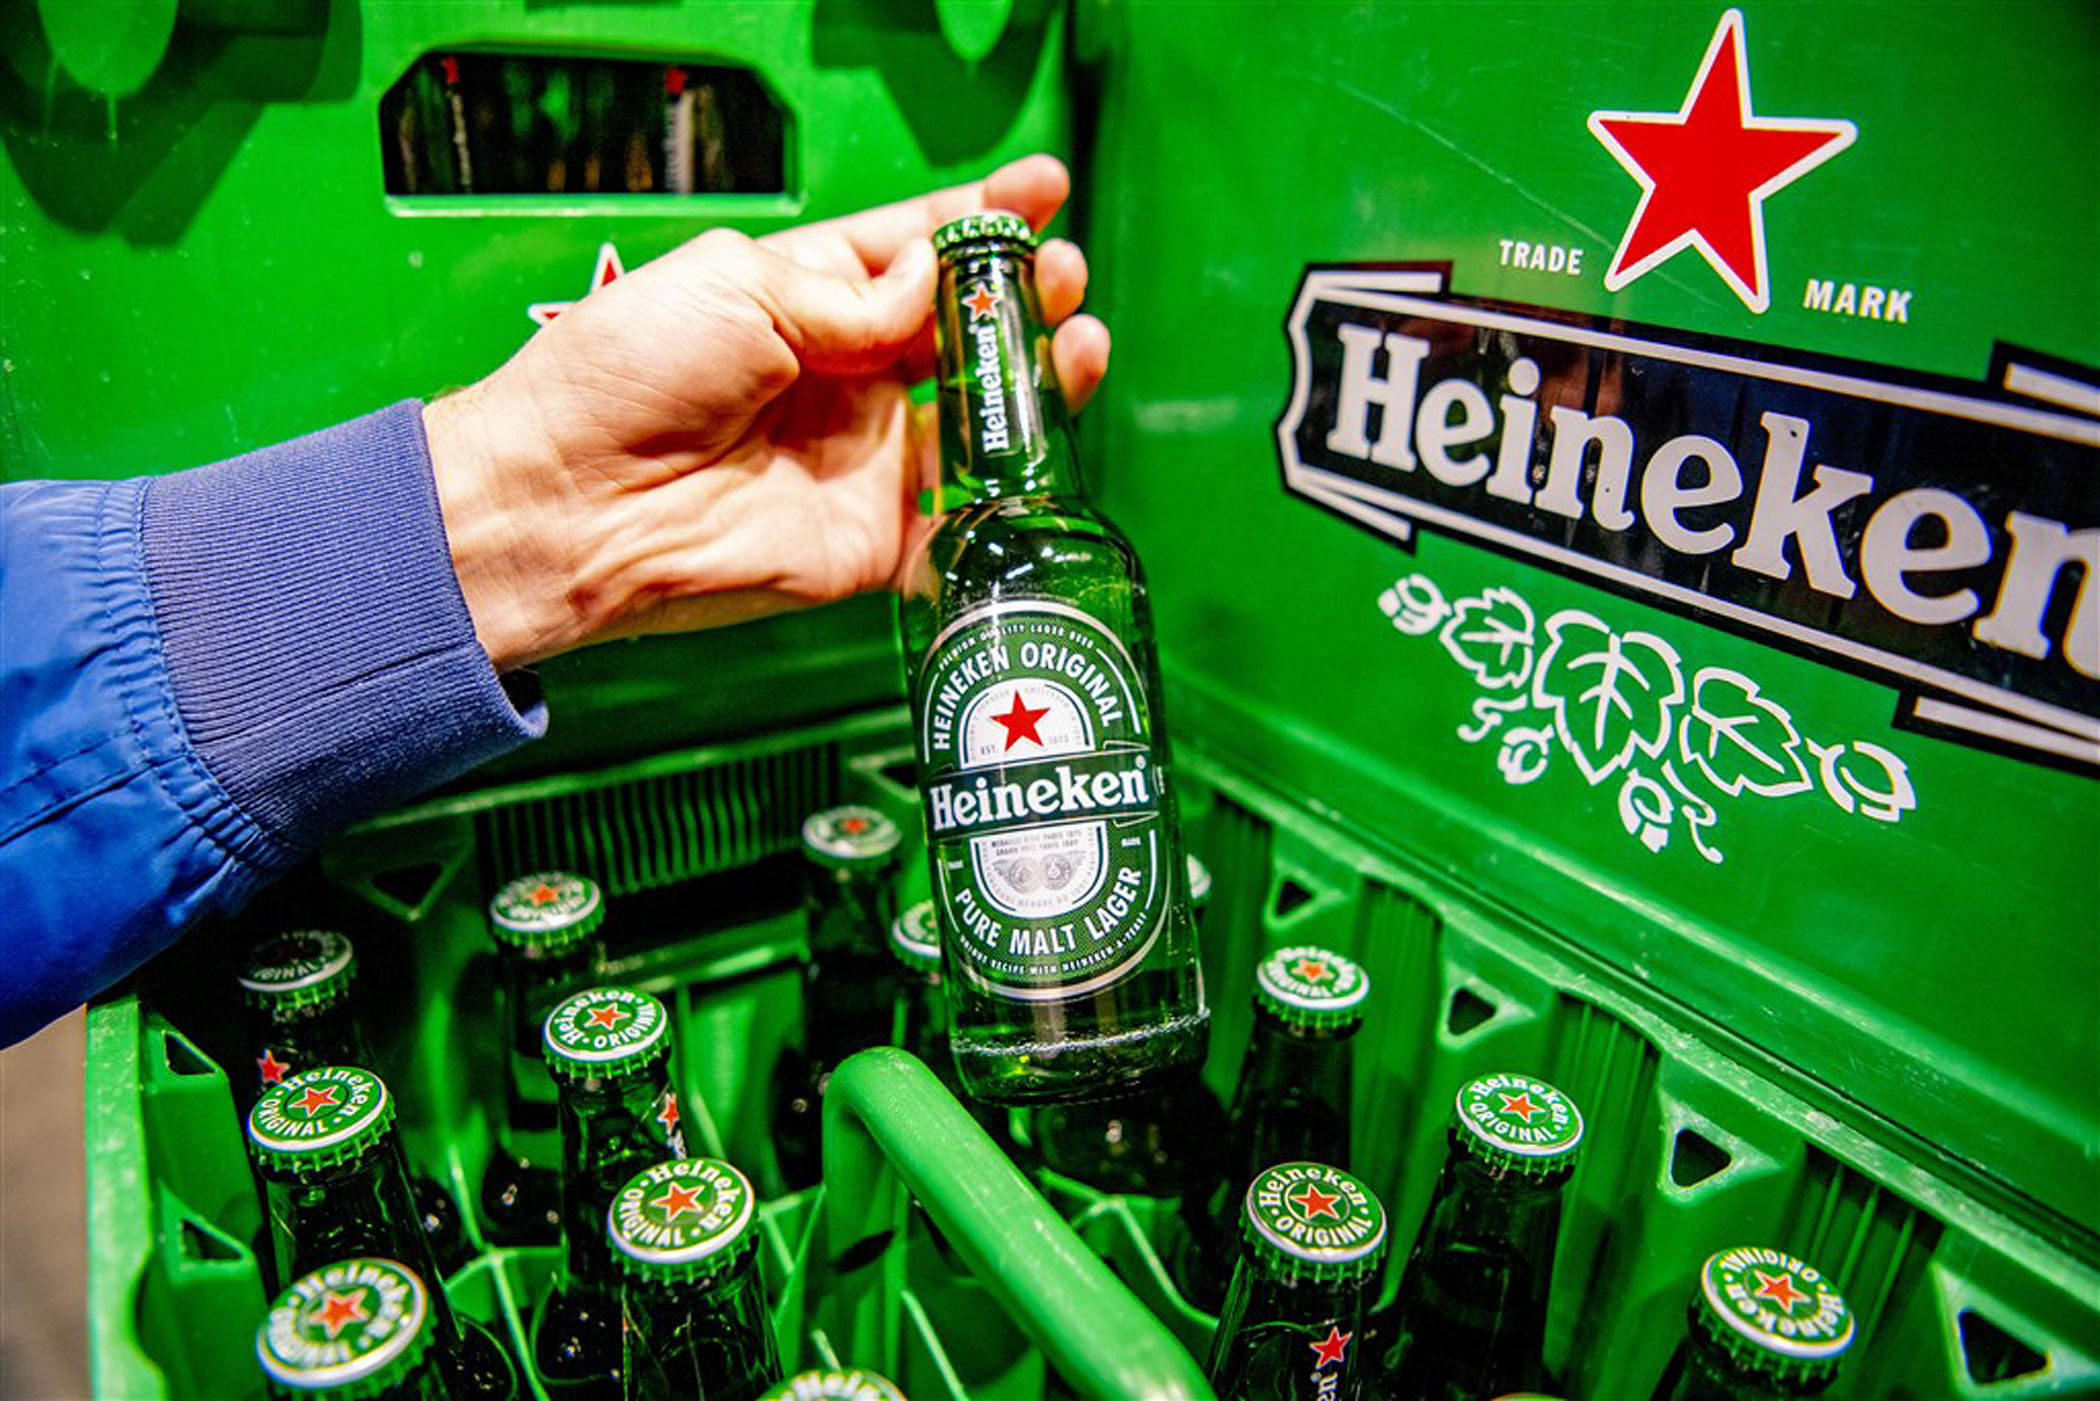 Heineken completes exit from Russia – POLITICO